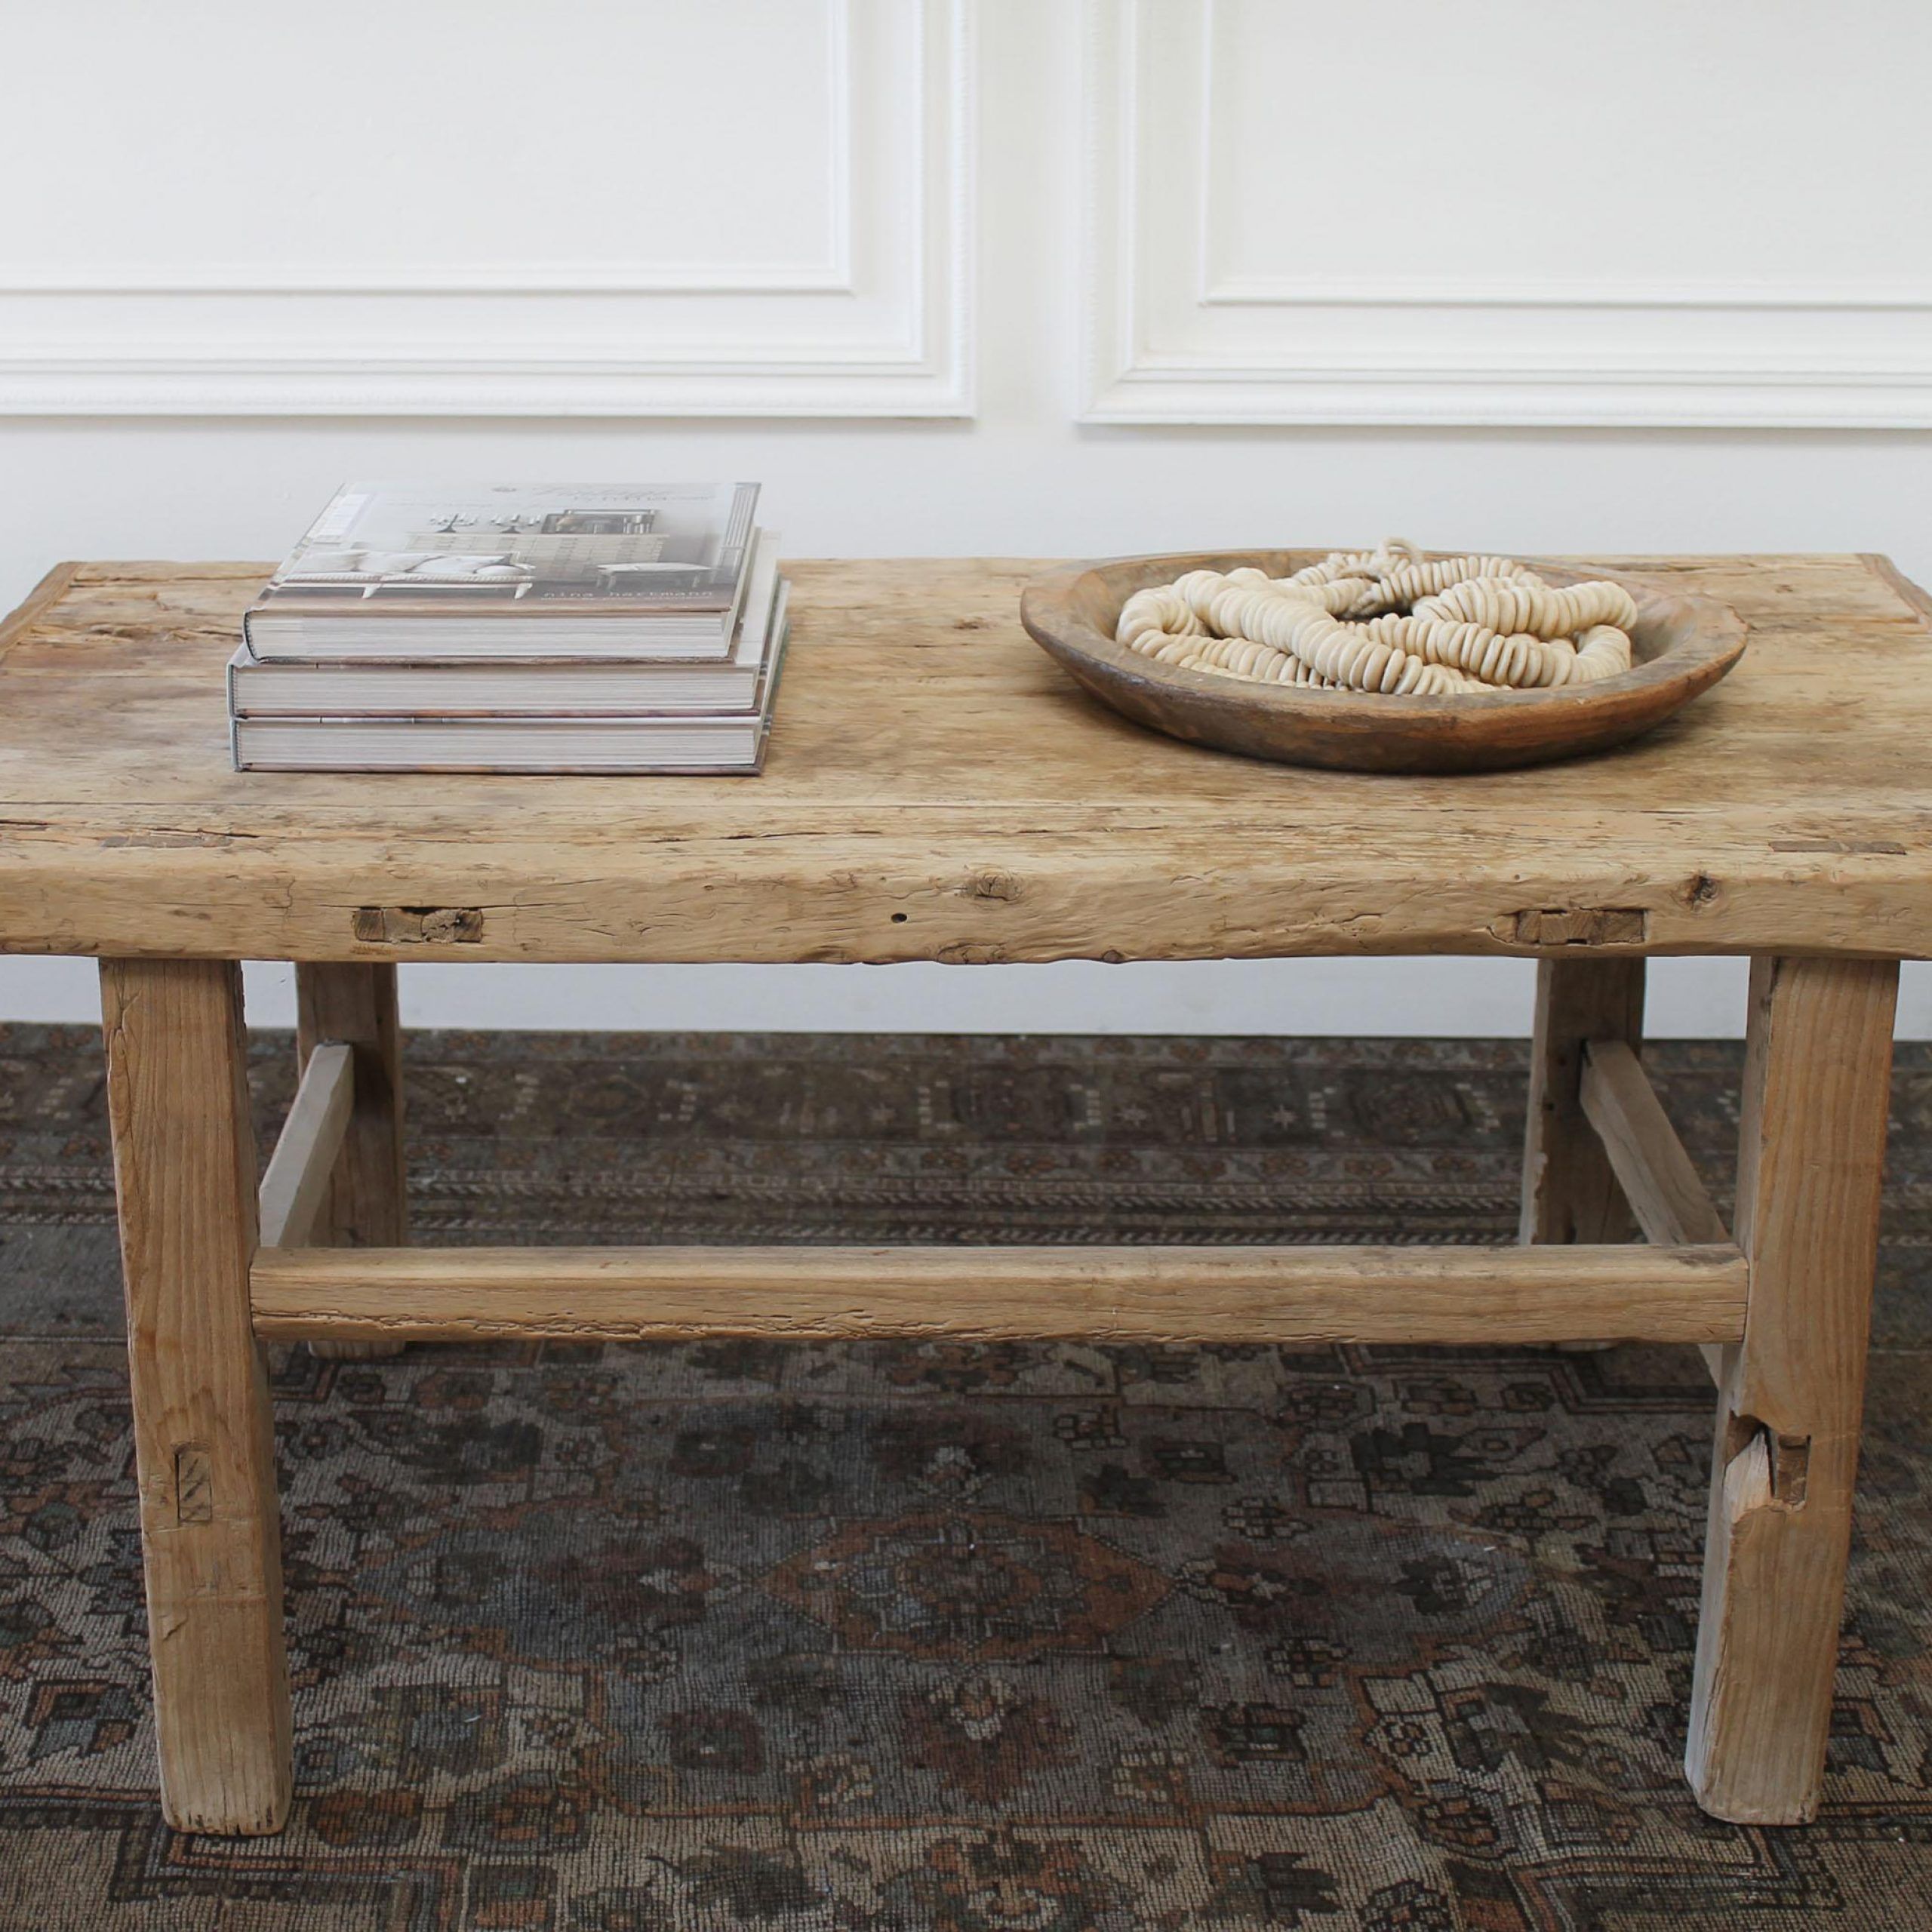 Antique Elm Wood Coffee Table At 1stdibs Throughout Old Elm Coffee Tables (View 10 of 20)